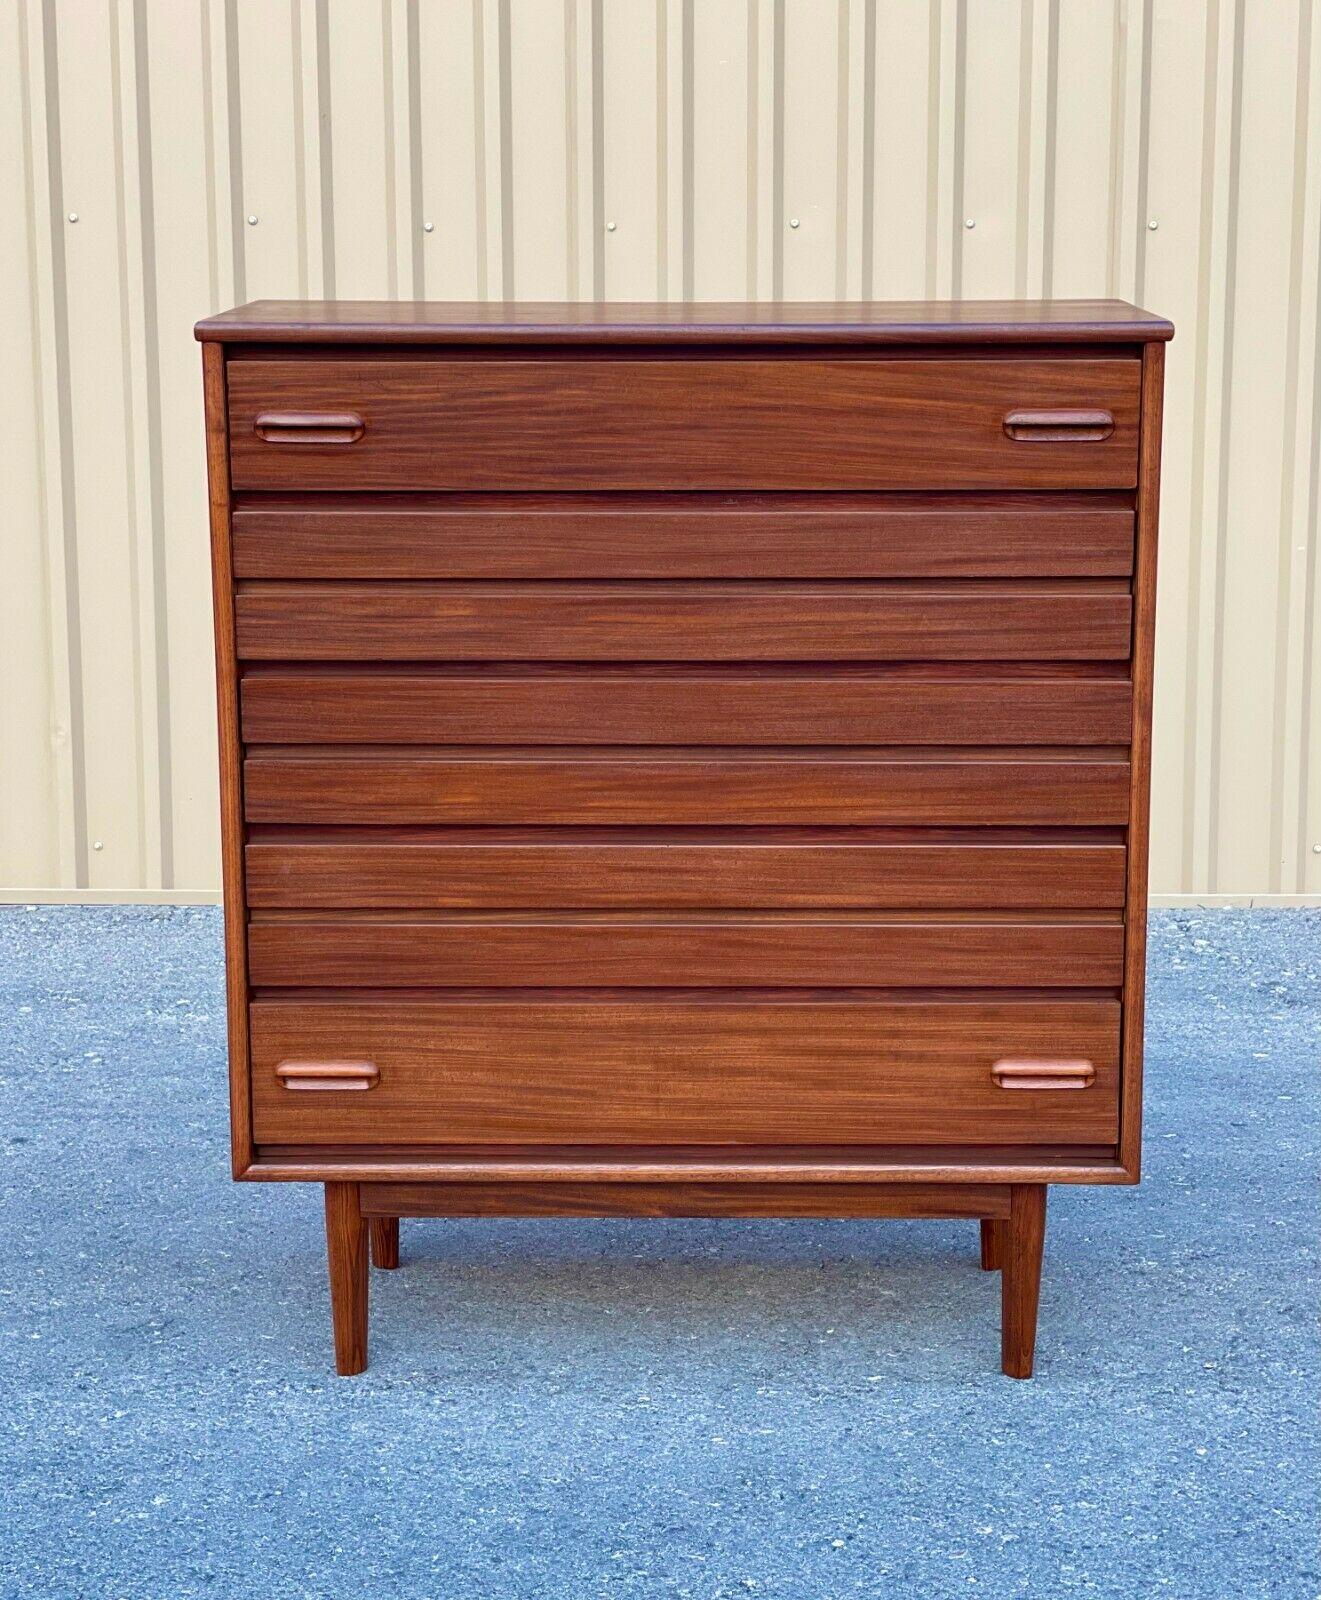 Beautiful Mid-Century Modern Stanley Furniture Mahogany high-boy dresser

Measures: 38” wide 18 ¼” deep 44 ¼” high


Lightly refinished. Some ware still present please see photos.